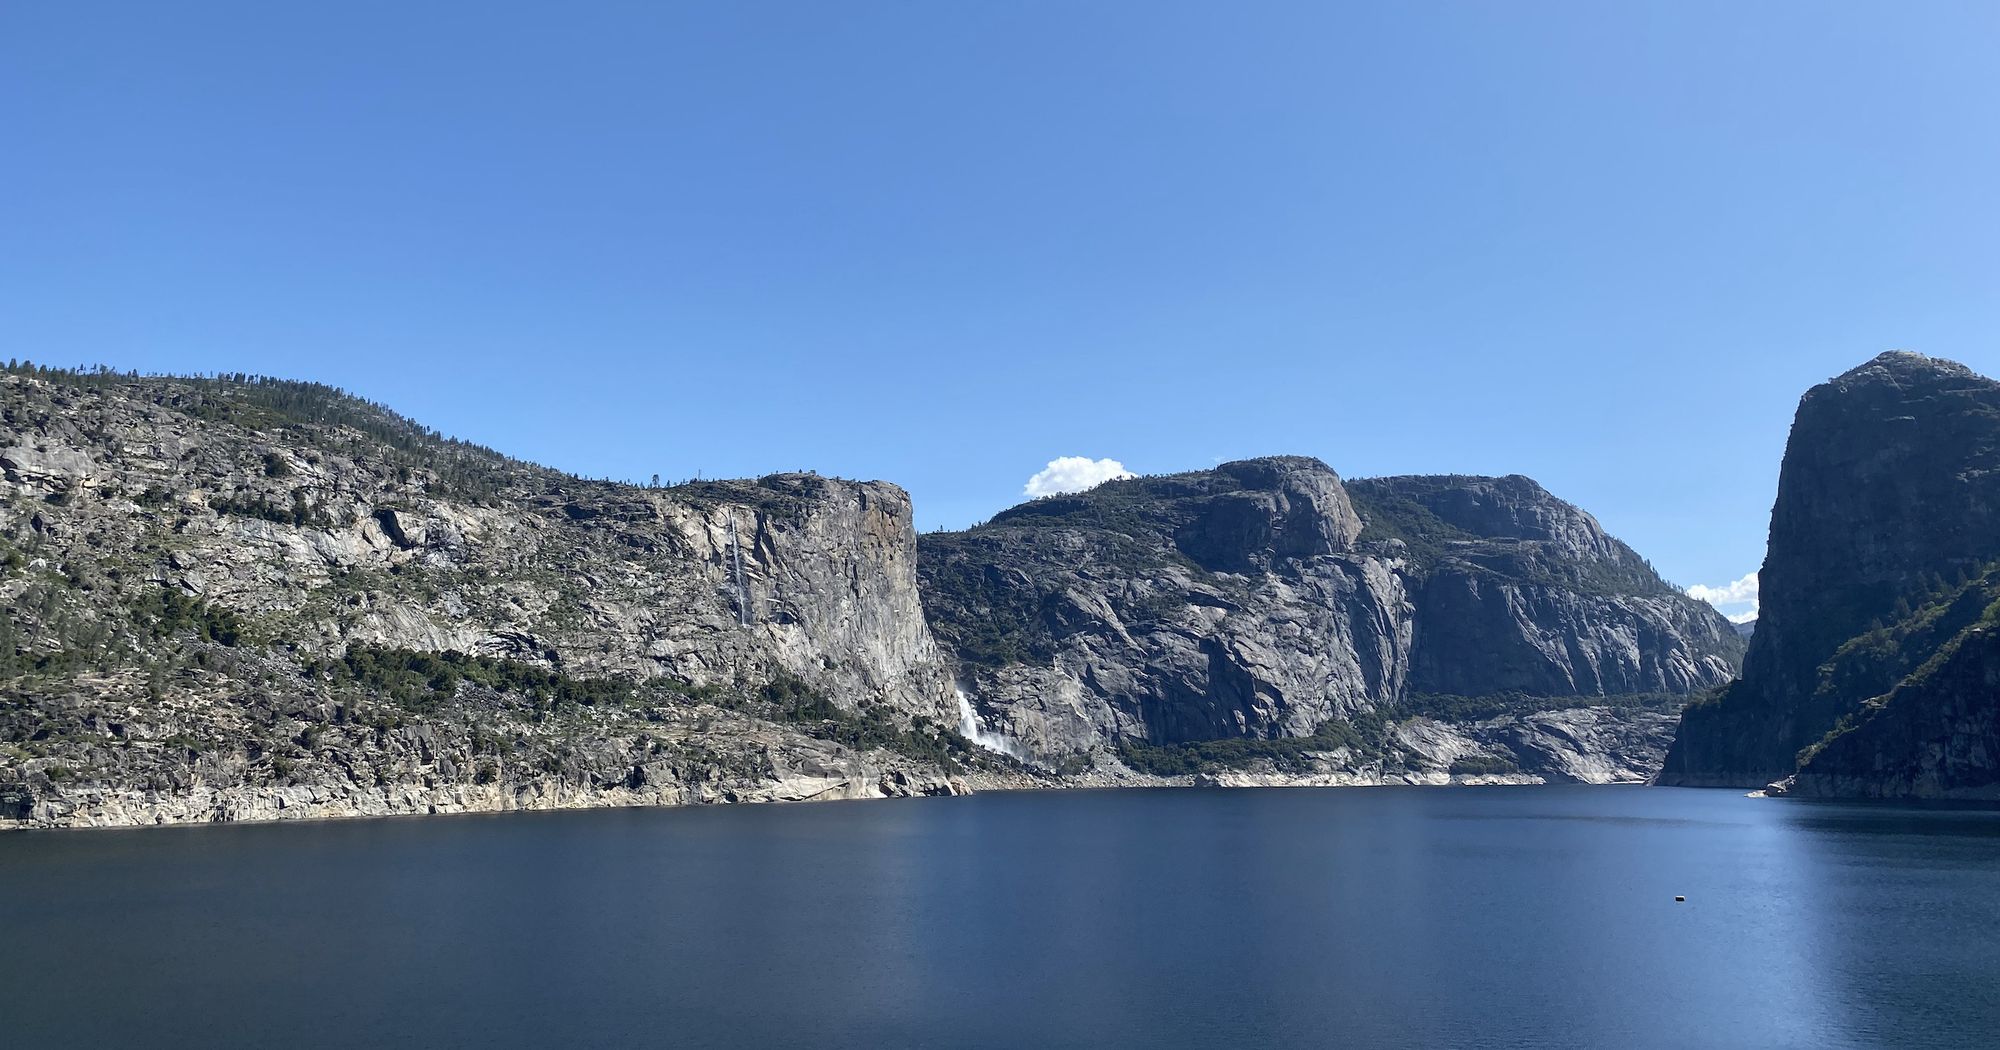 Hetch Hetchy backpacking trip (3 days, 31 miles)